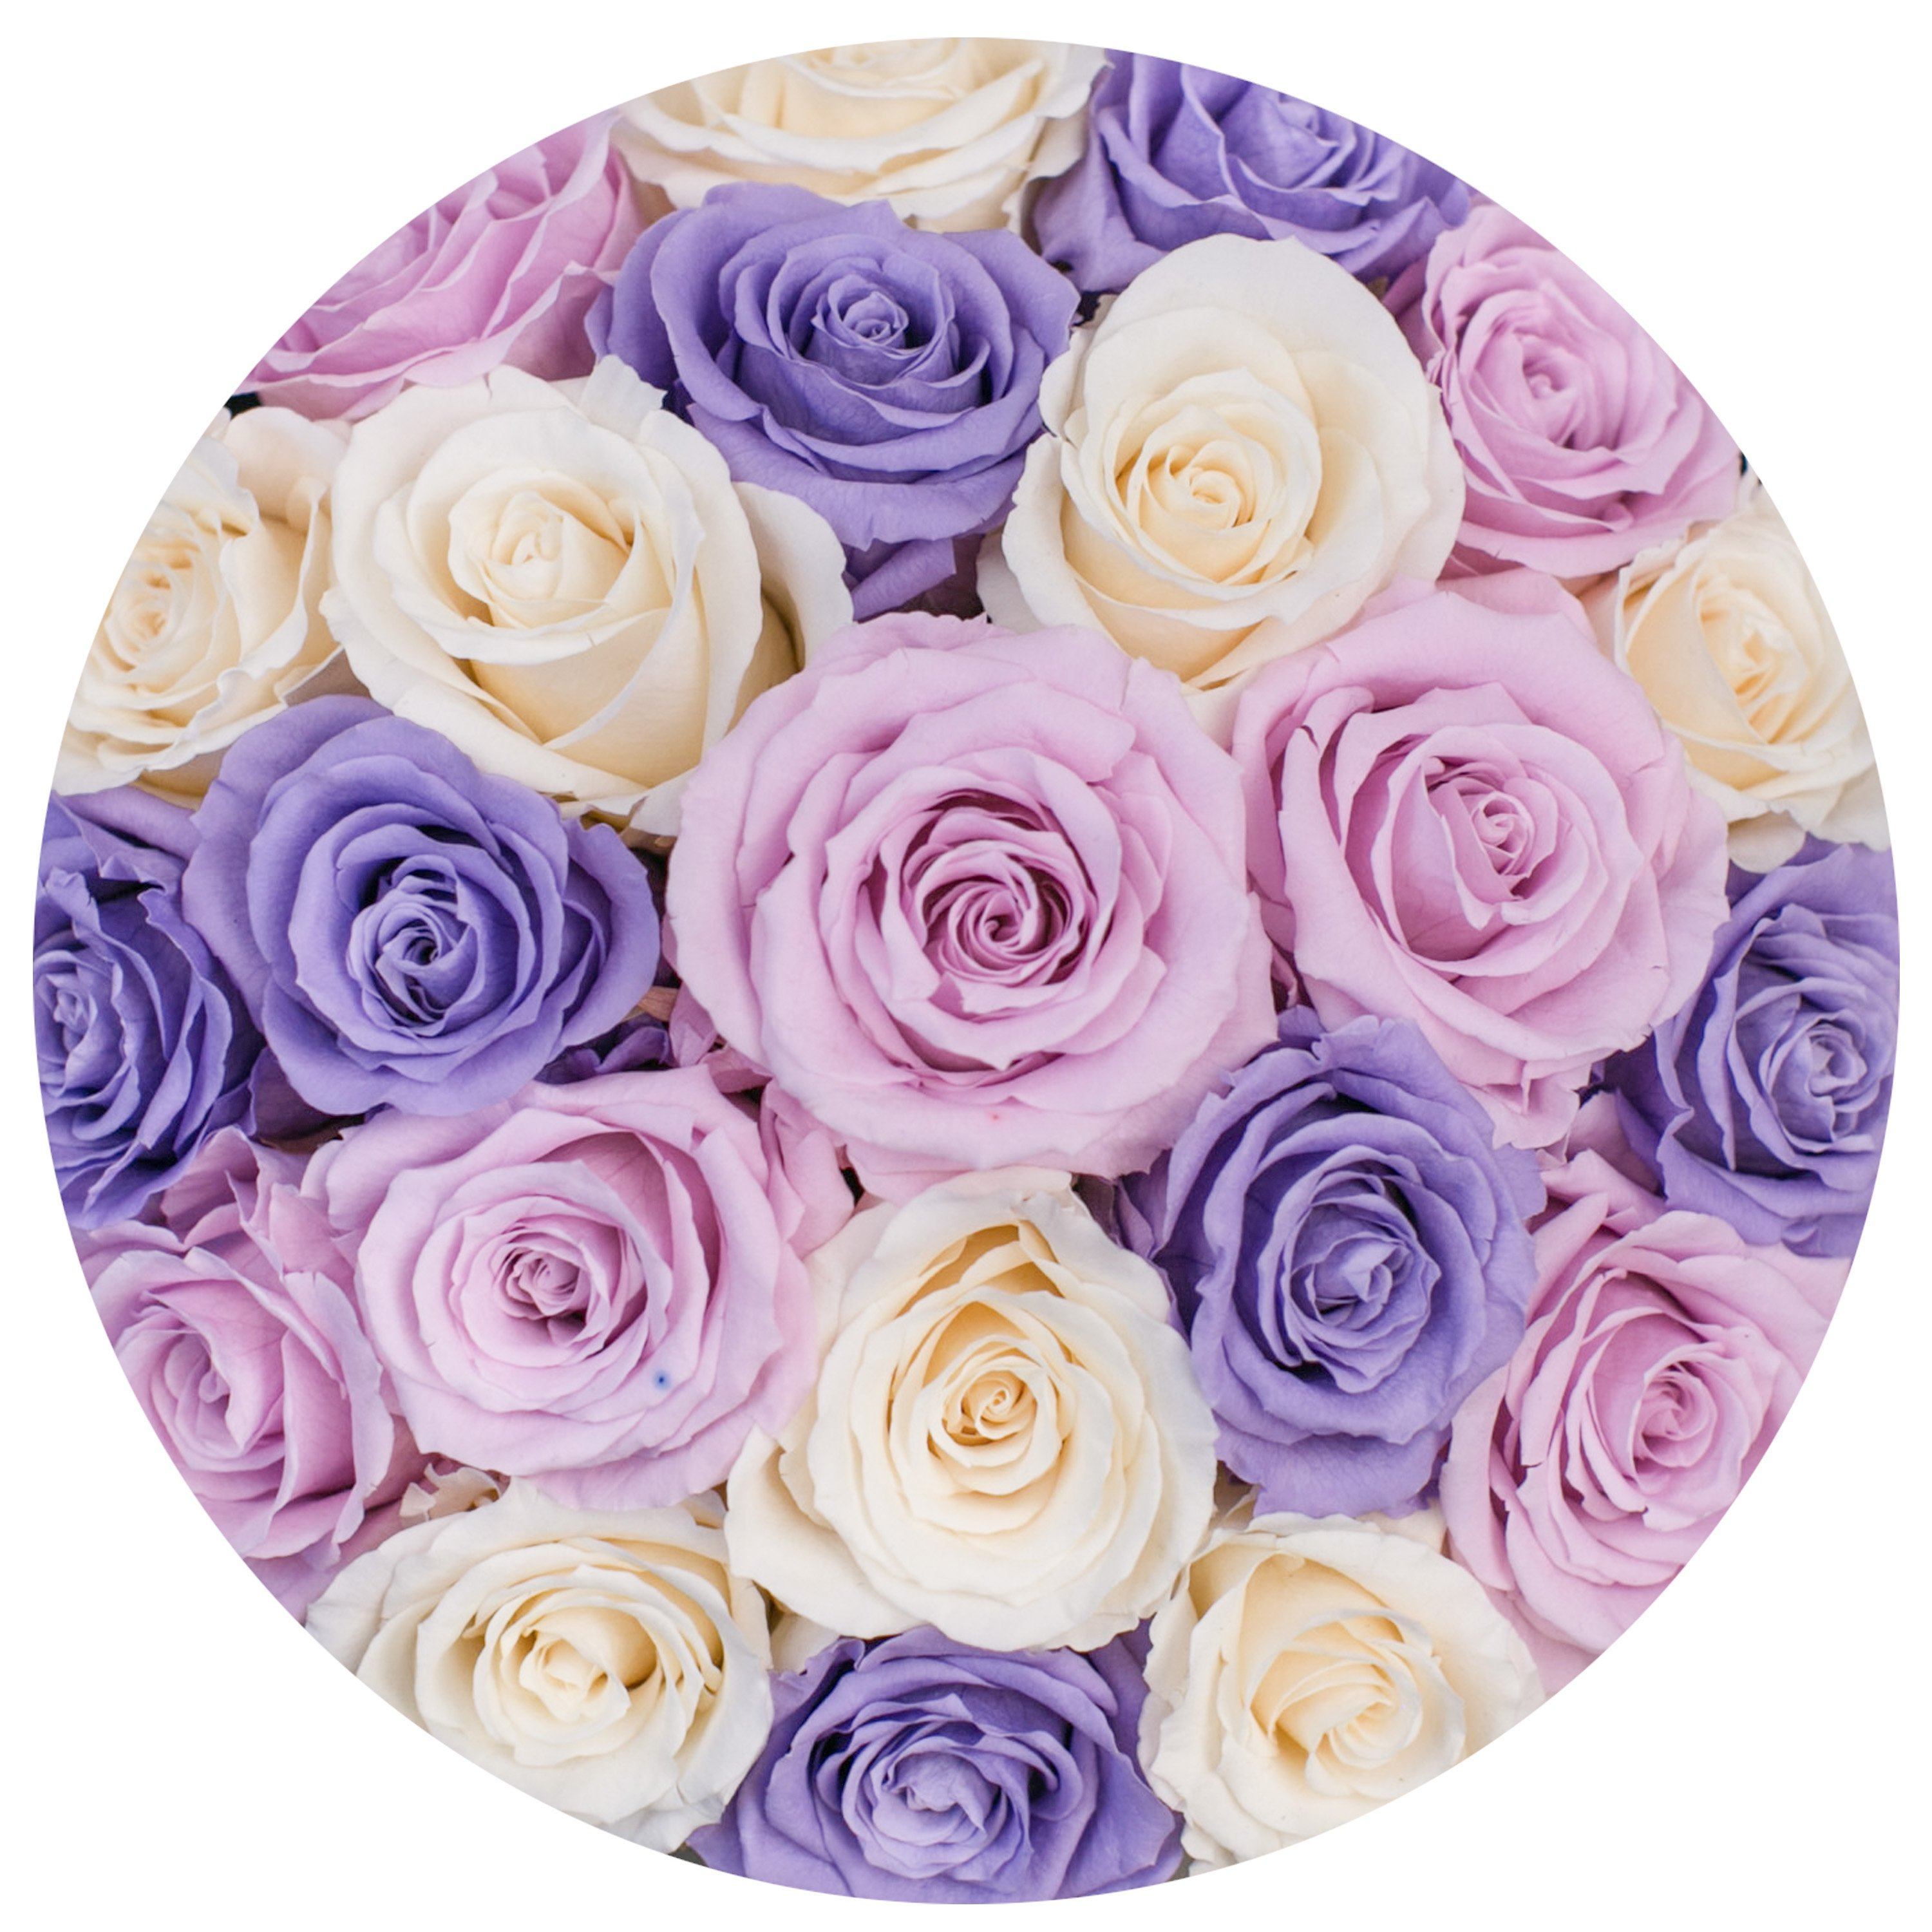 classic round box - light-pink suede box - violet/ivory/pink roses violet eternity roses - the million roses